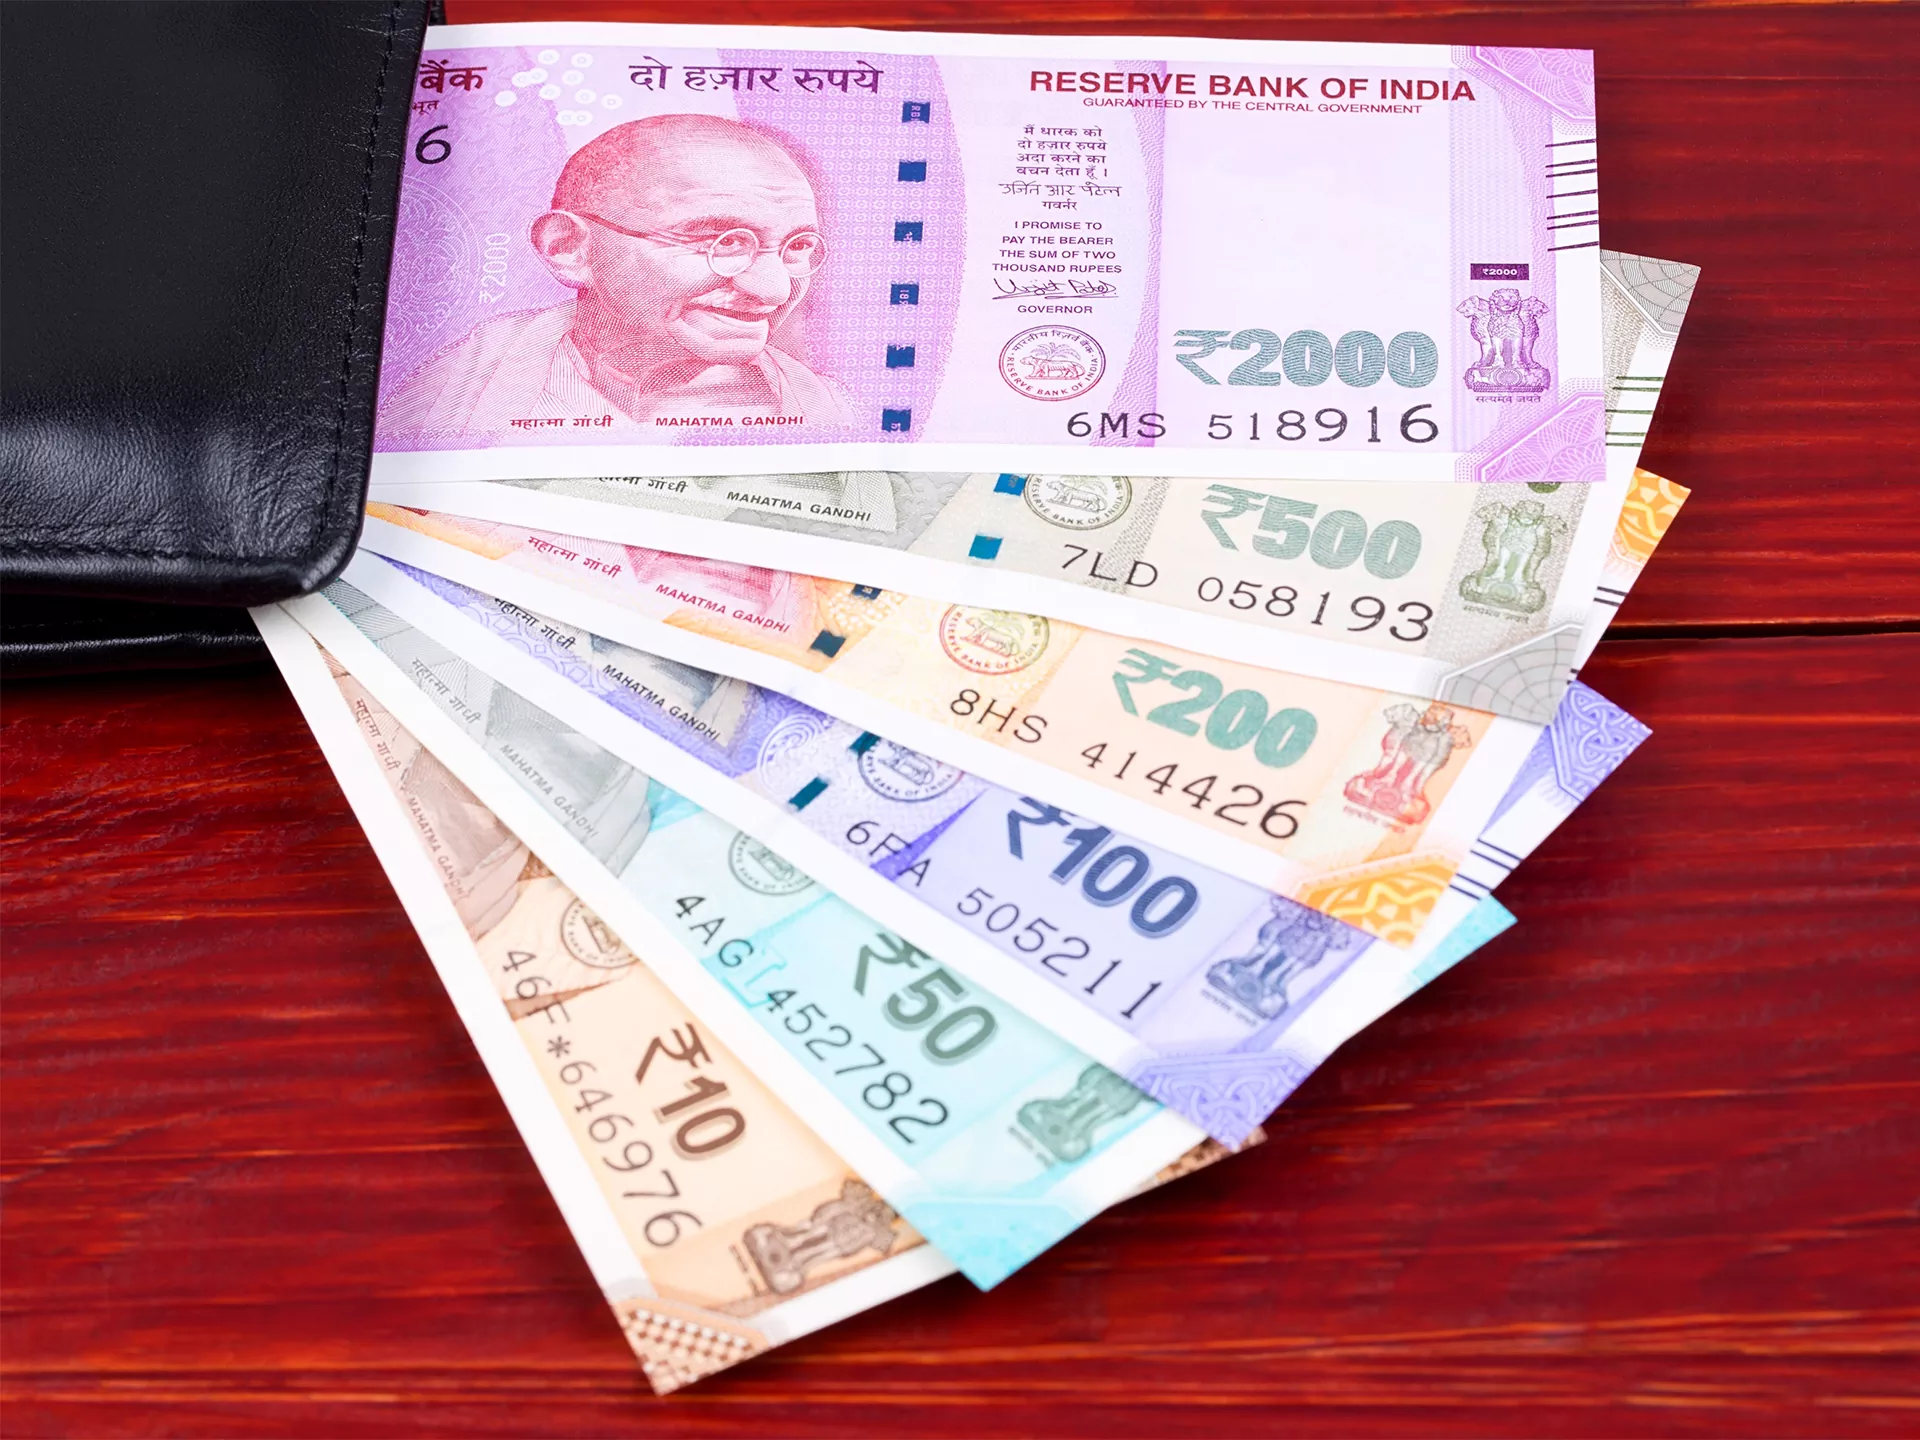 Indian bettors can deposit and withdraw money in rupees at Campobet.